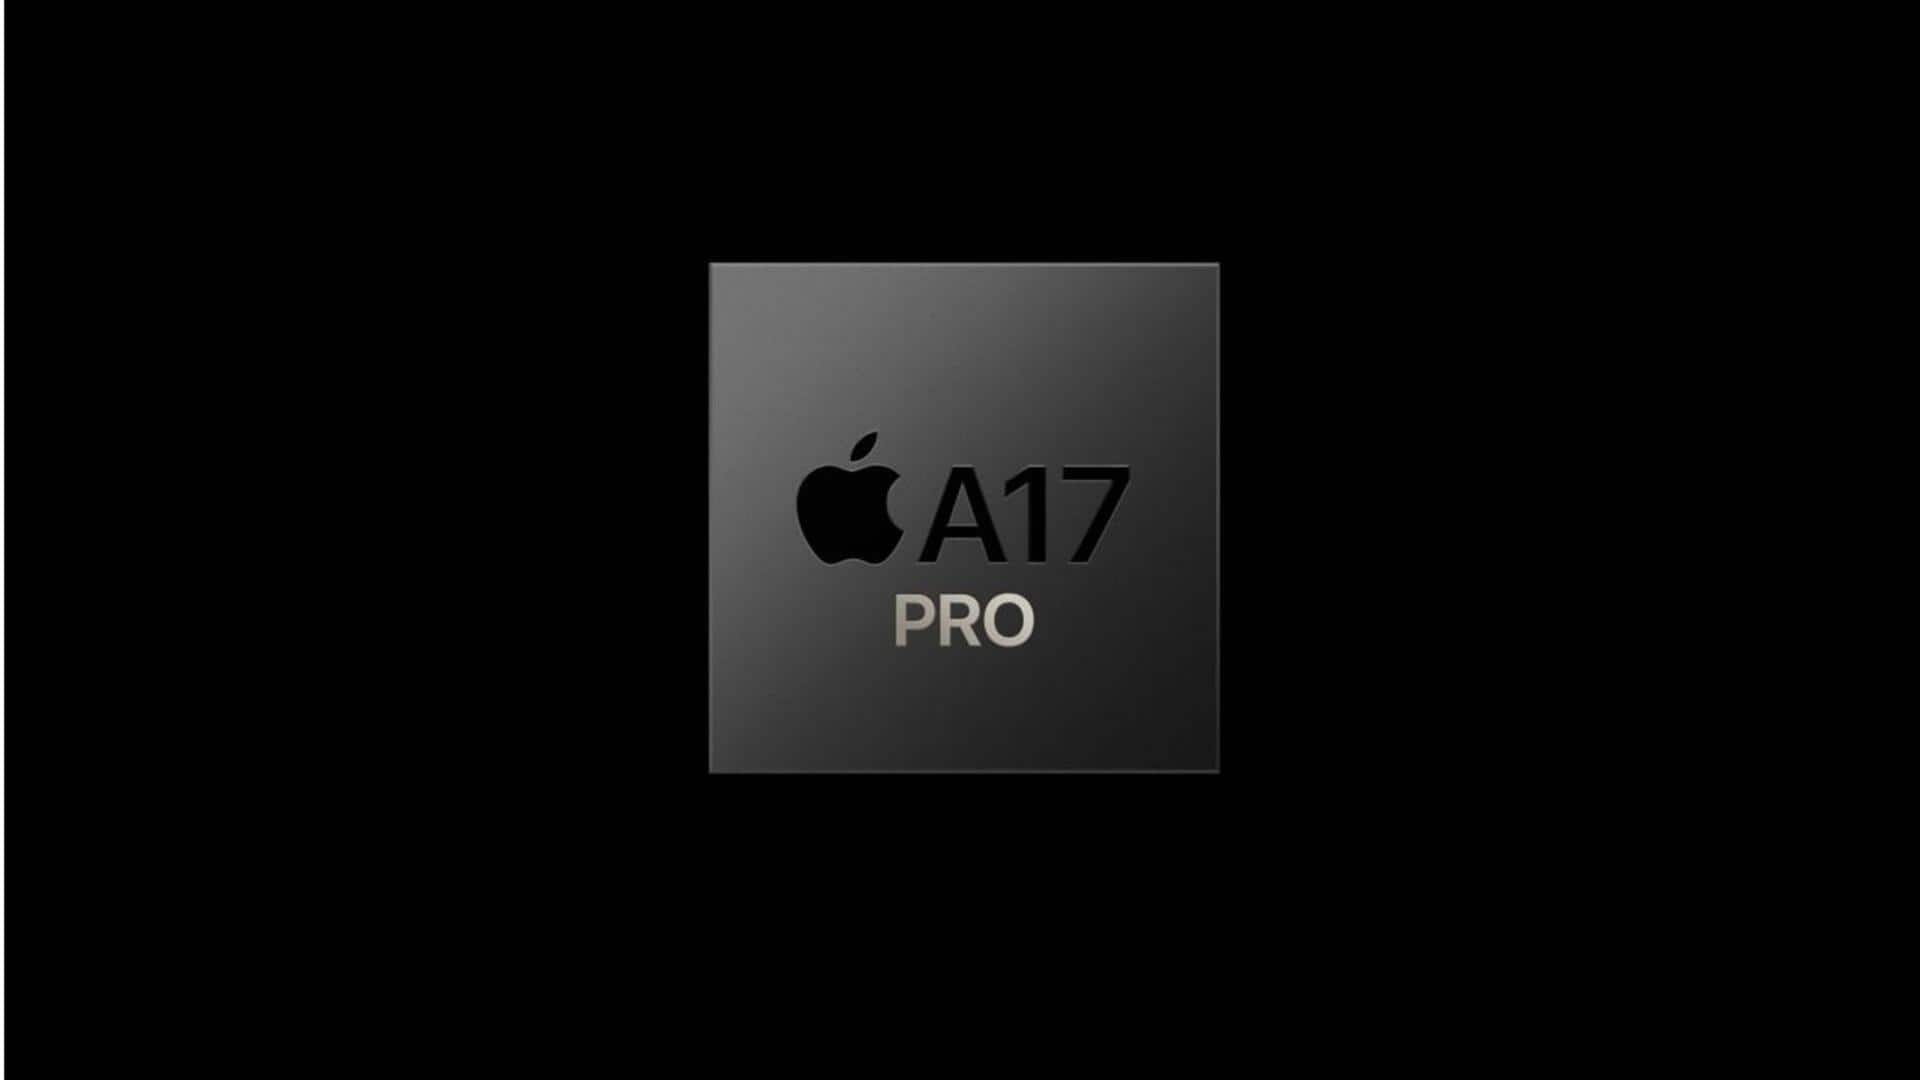 Why Apple's A17 Pro chip is a big deal